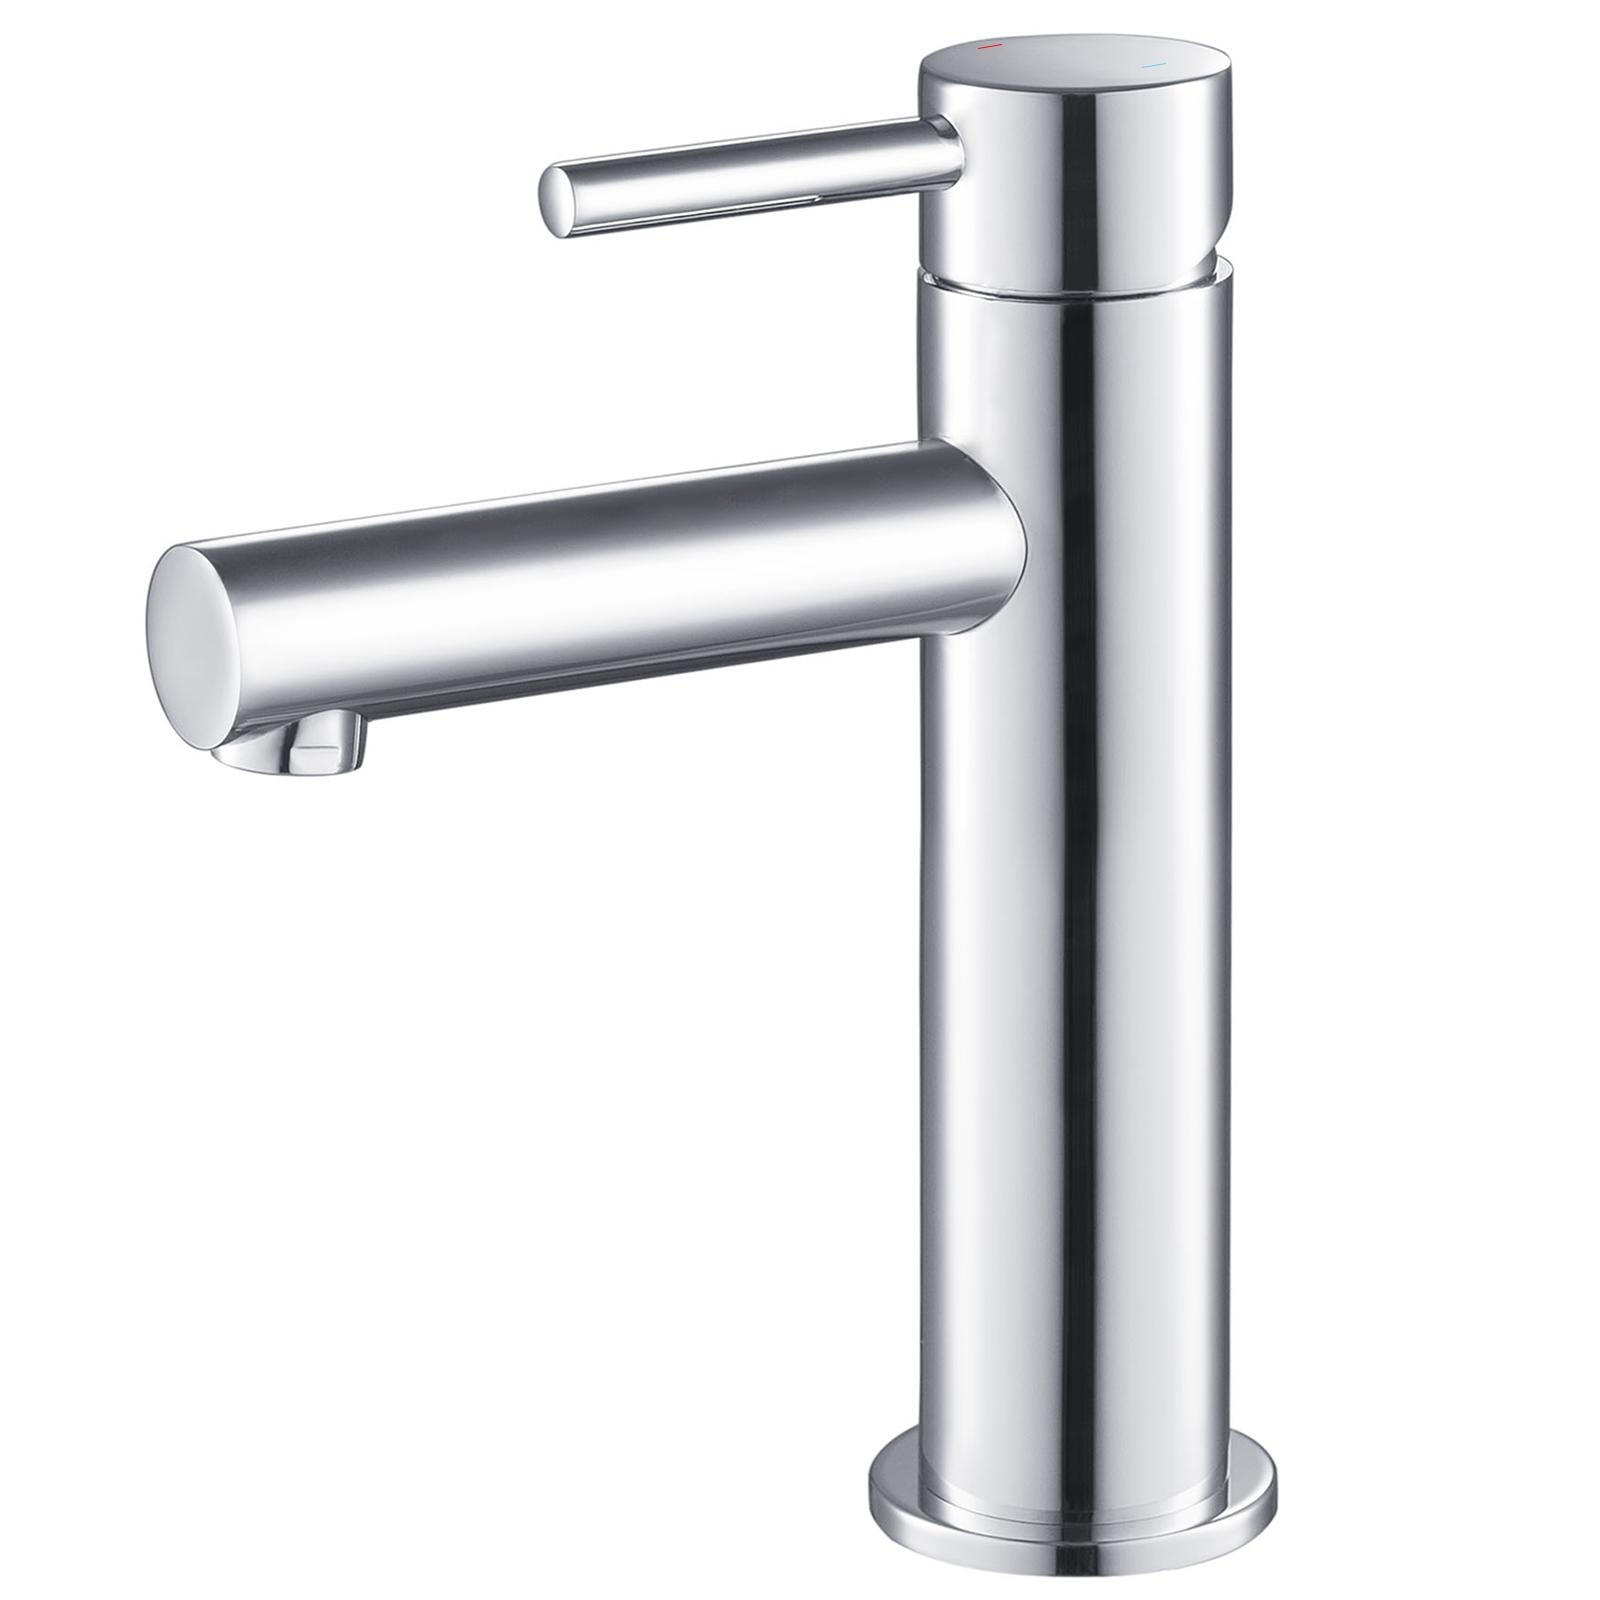 Modern Single Hole Single Handle Bathroom Faucet, Vanity Lavatory Faucet for Bathroom Sink Mixer Tap,1.2 GPM Water Flow